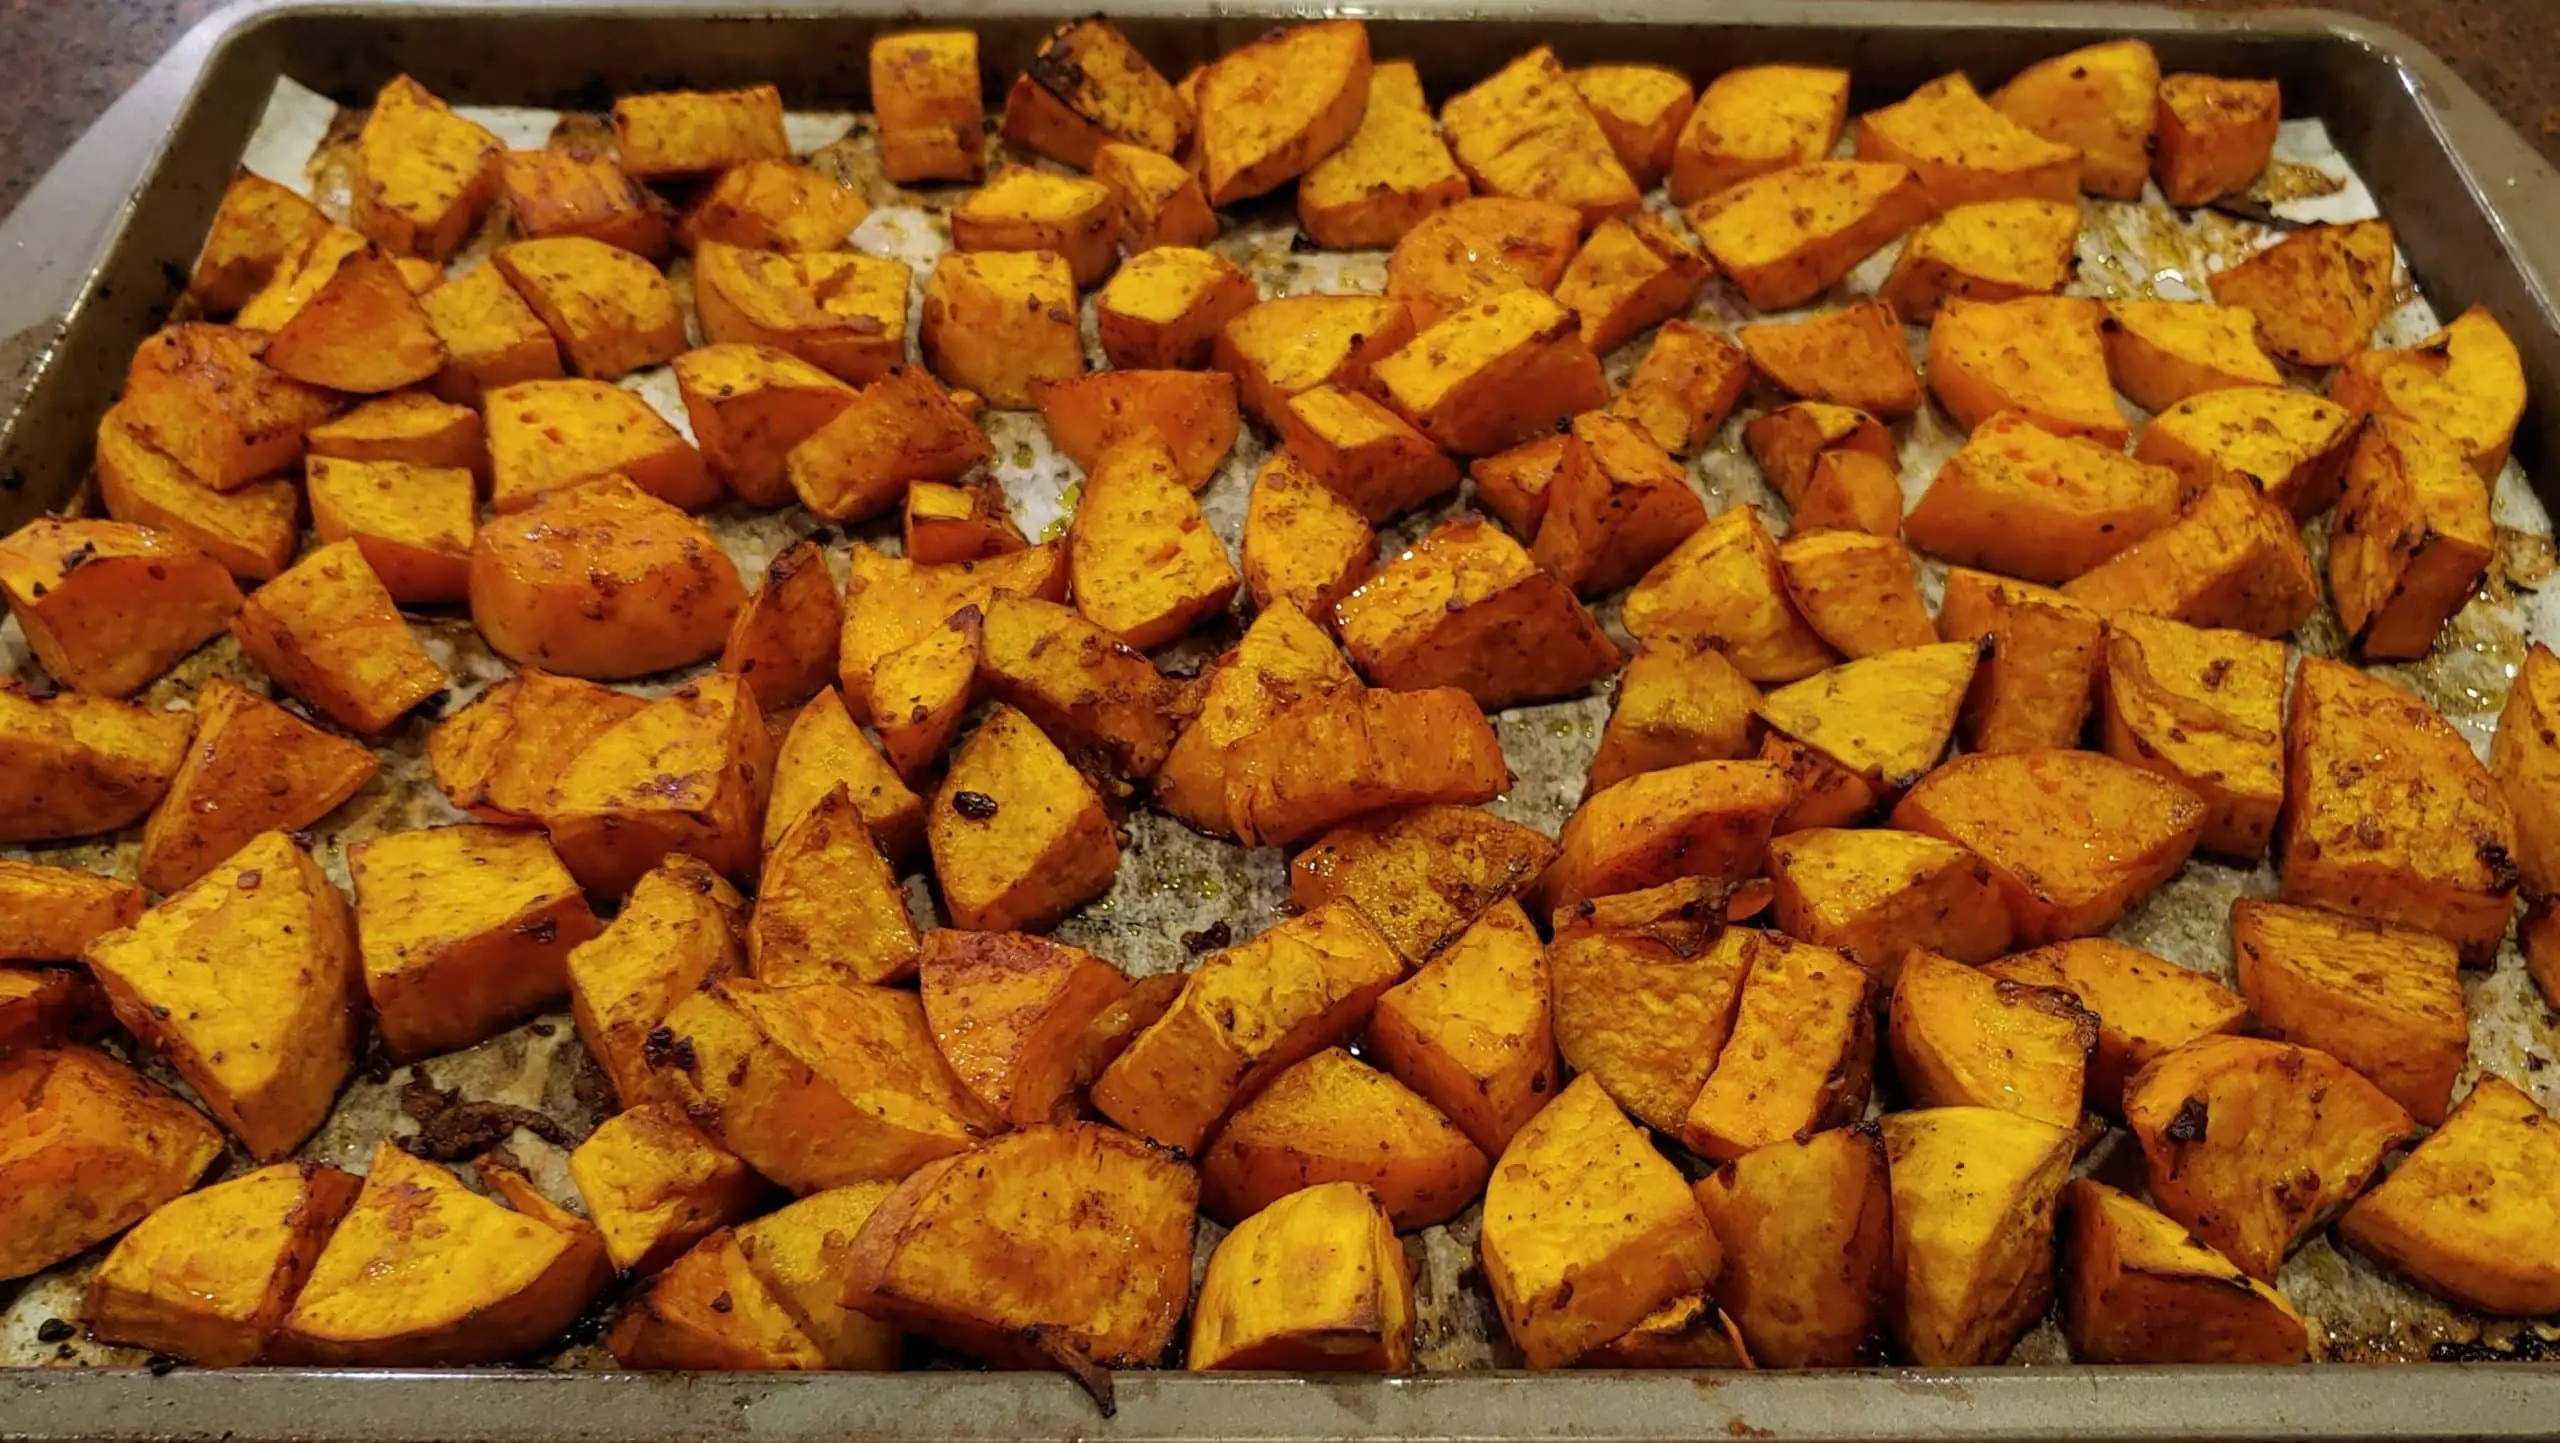 Sweet Potatoes - Dining in with Danielle